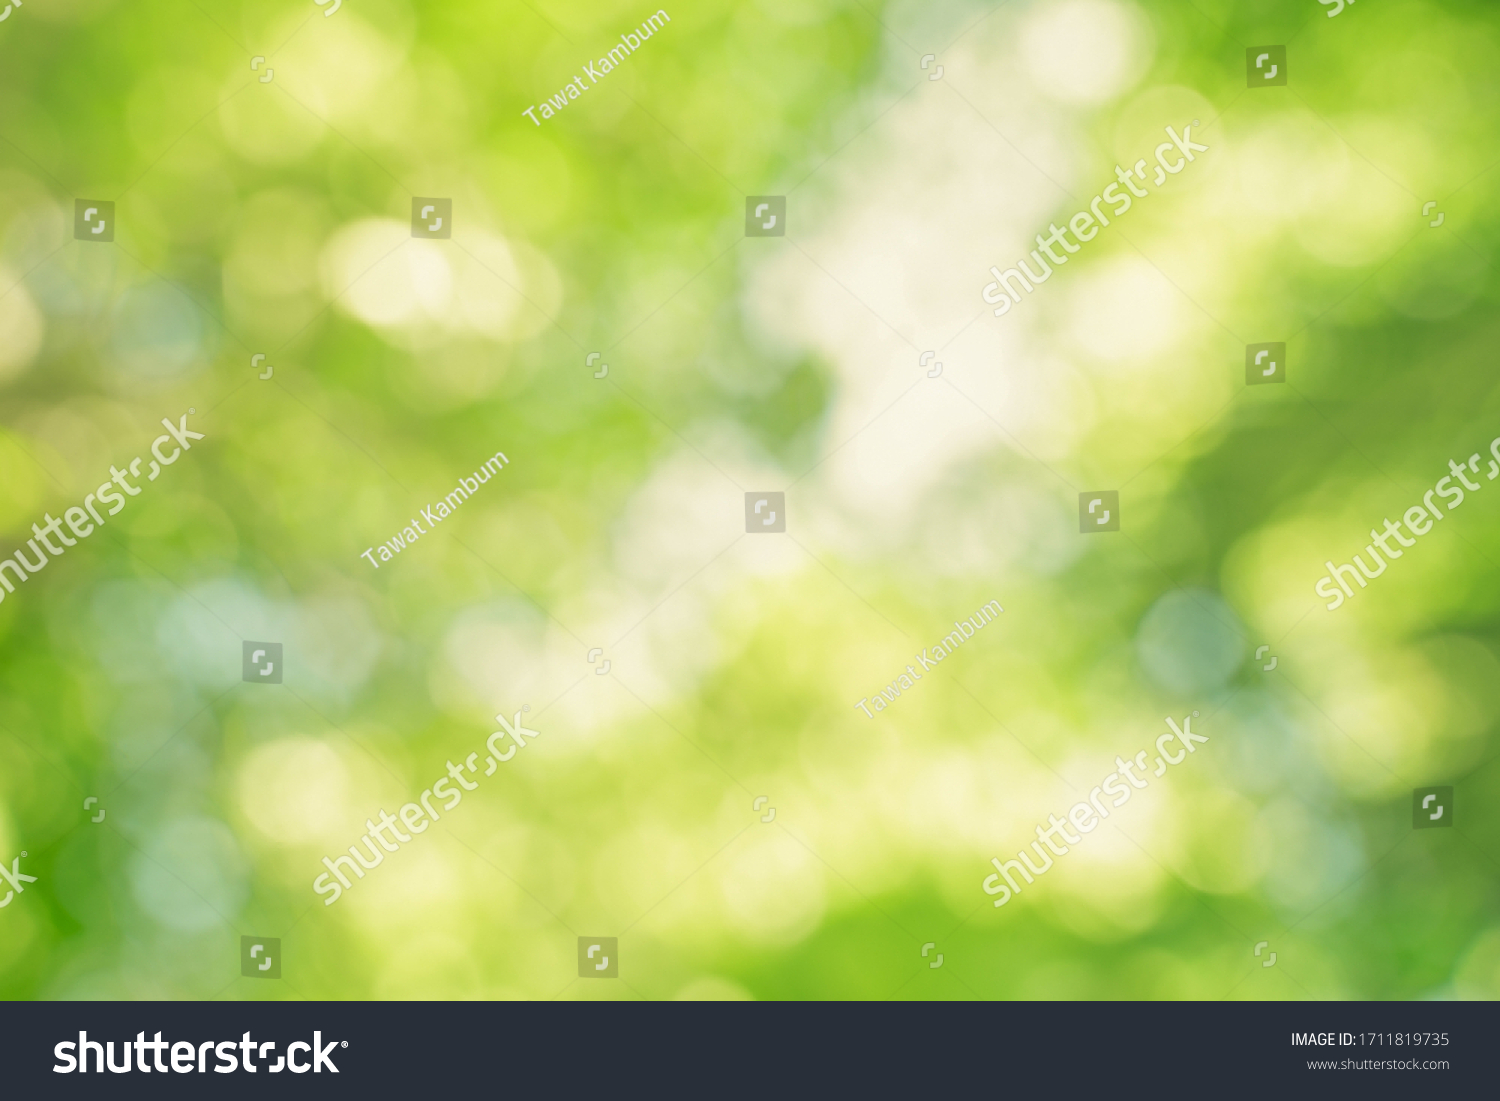 abstract blur green color for background,blurred and defocused effect spring concept for design,nature view of blurred greenery background in garden using as background natural,fresh wallpaper concept #1711819735